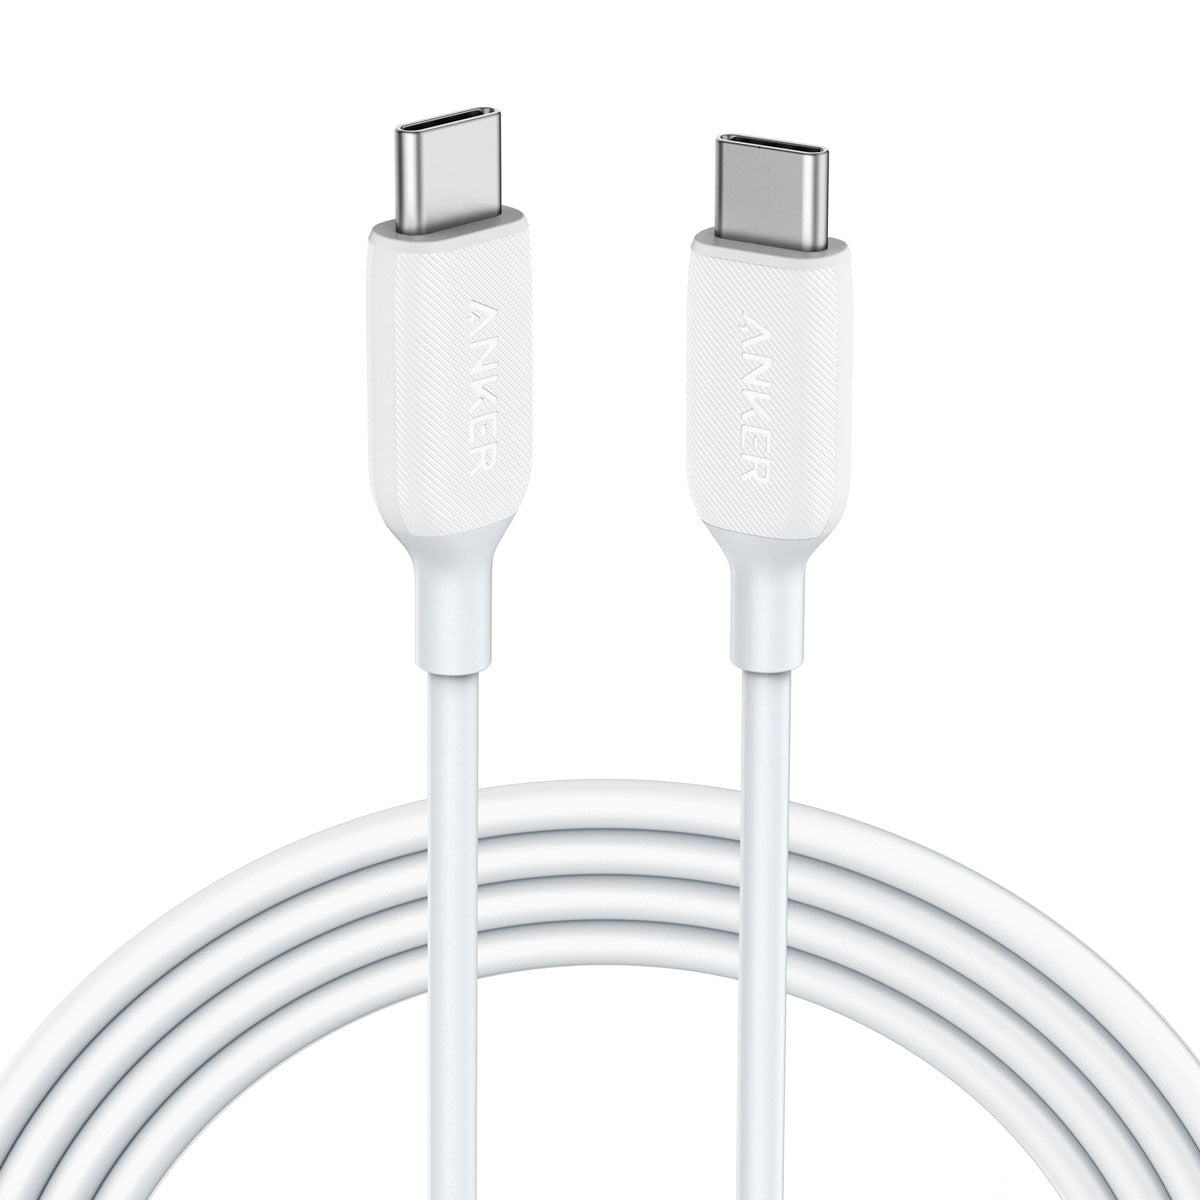 Anker PowerLine III USB-C To USB-C 1.8m Charge/Data Cable - White - 100W Power Support - A8856